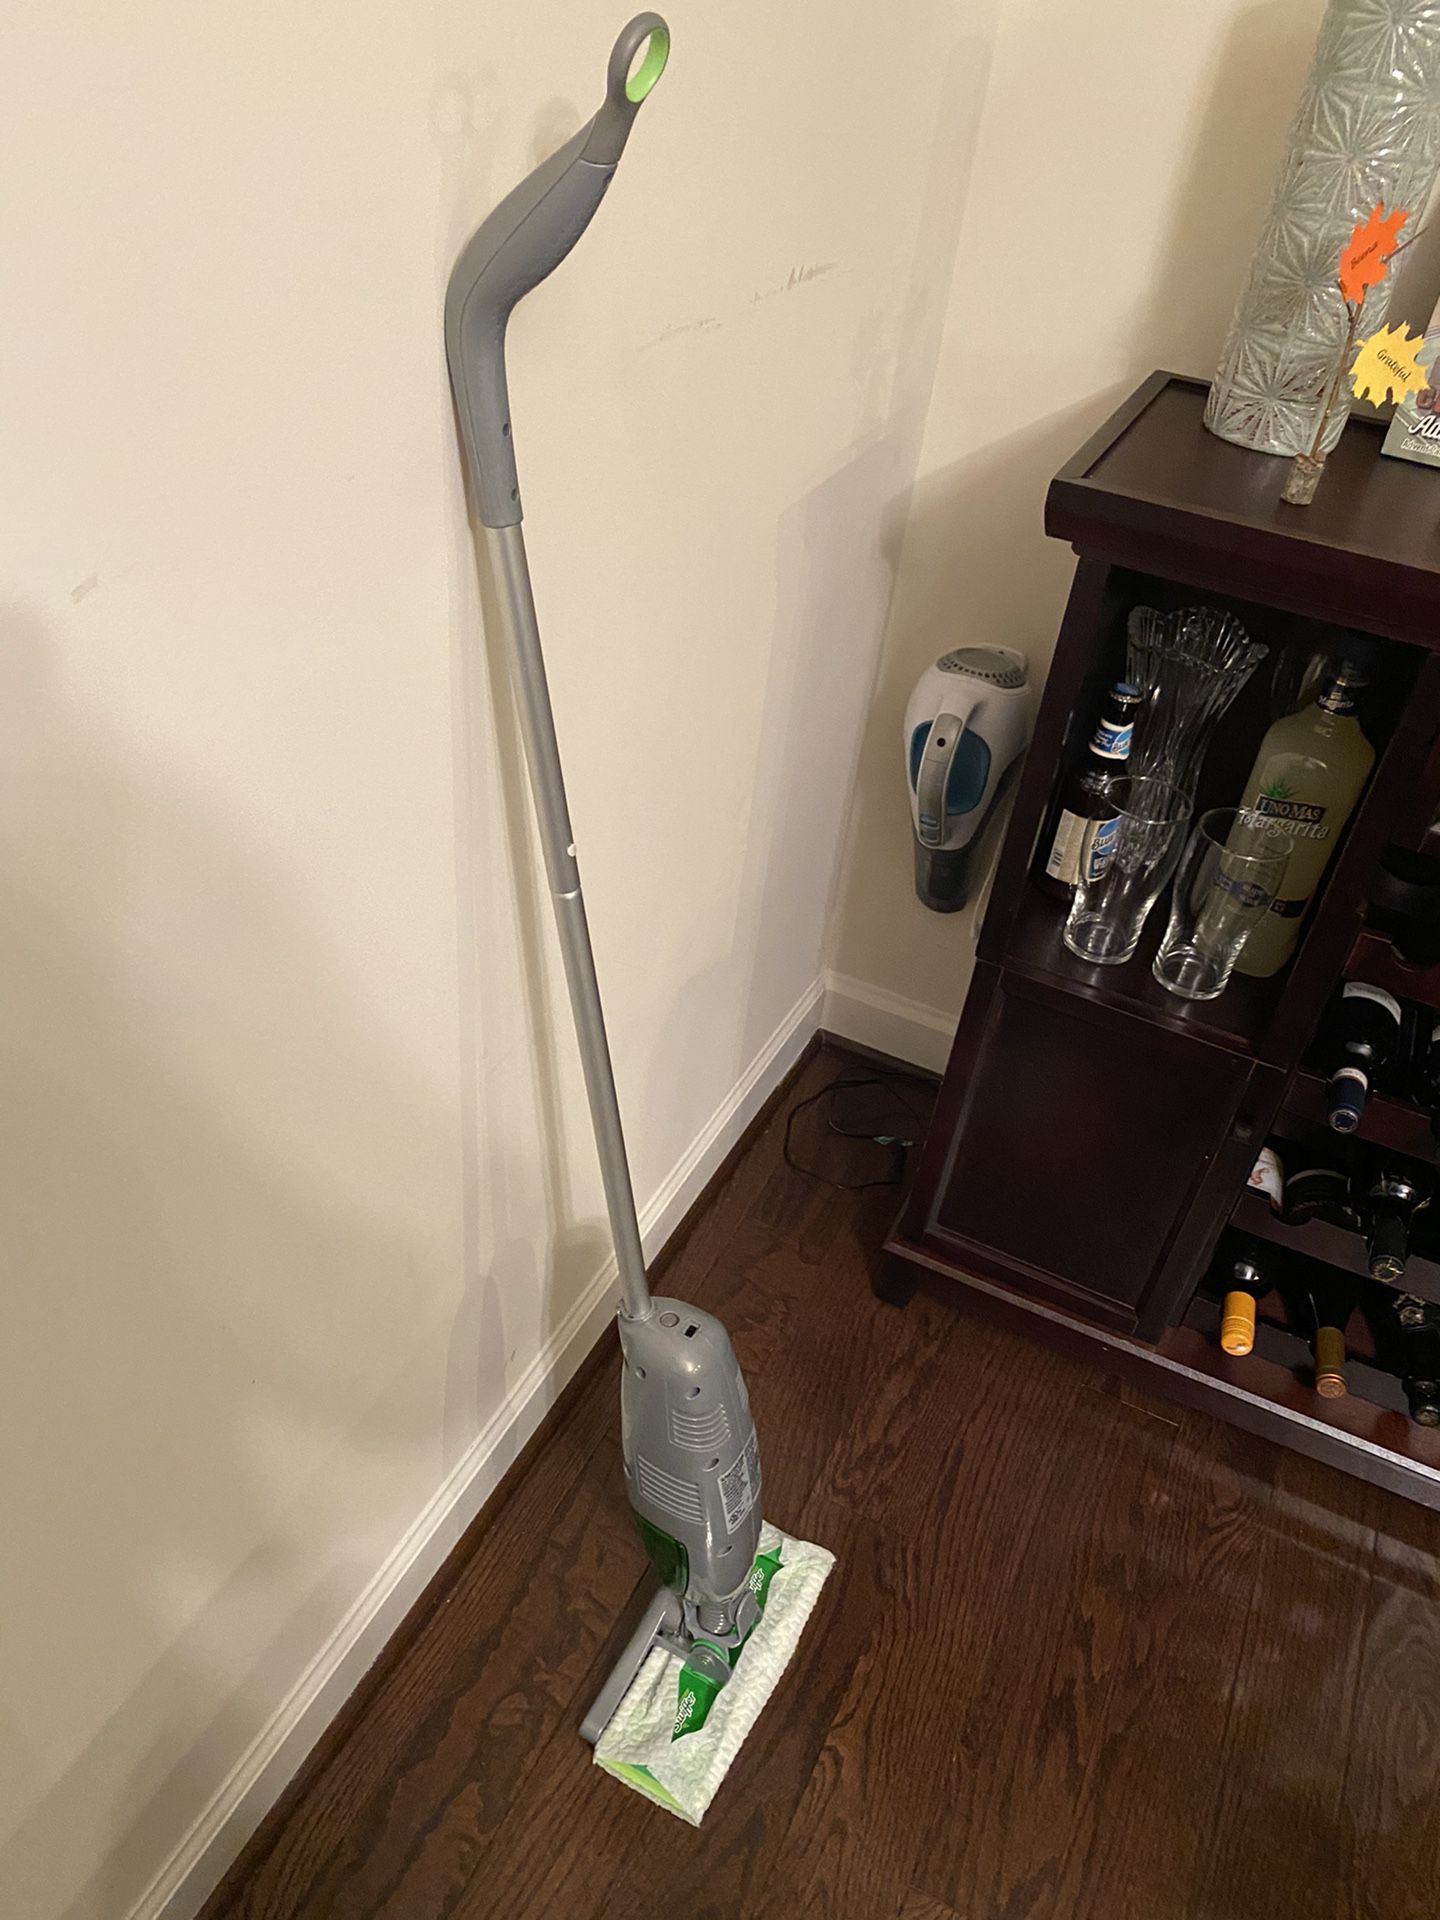 Swiffer Sweep and Vac Vacuum Cleaner for Floor Cleaning, Includes: 1 Rechargable Vacuum, 8 Dry Pads, 1 Charger